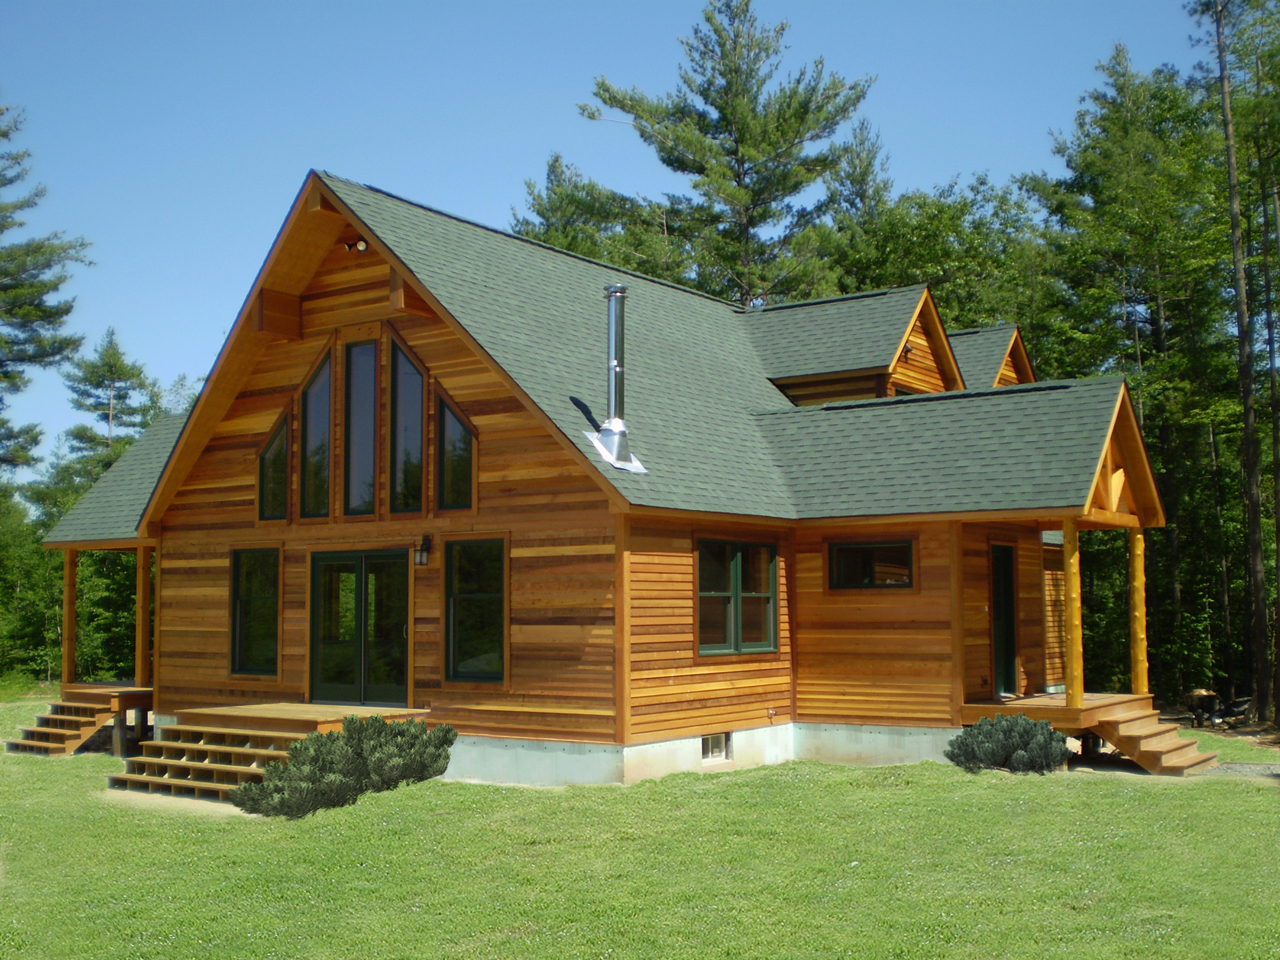 Download this Affordable Energy Efficient Custom Modular Homes picture